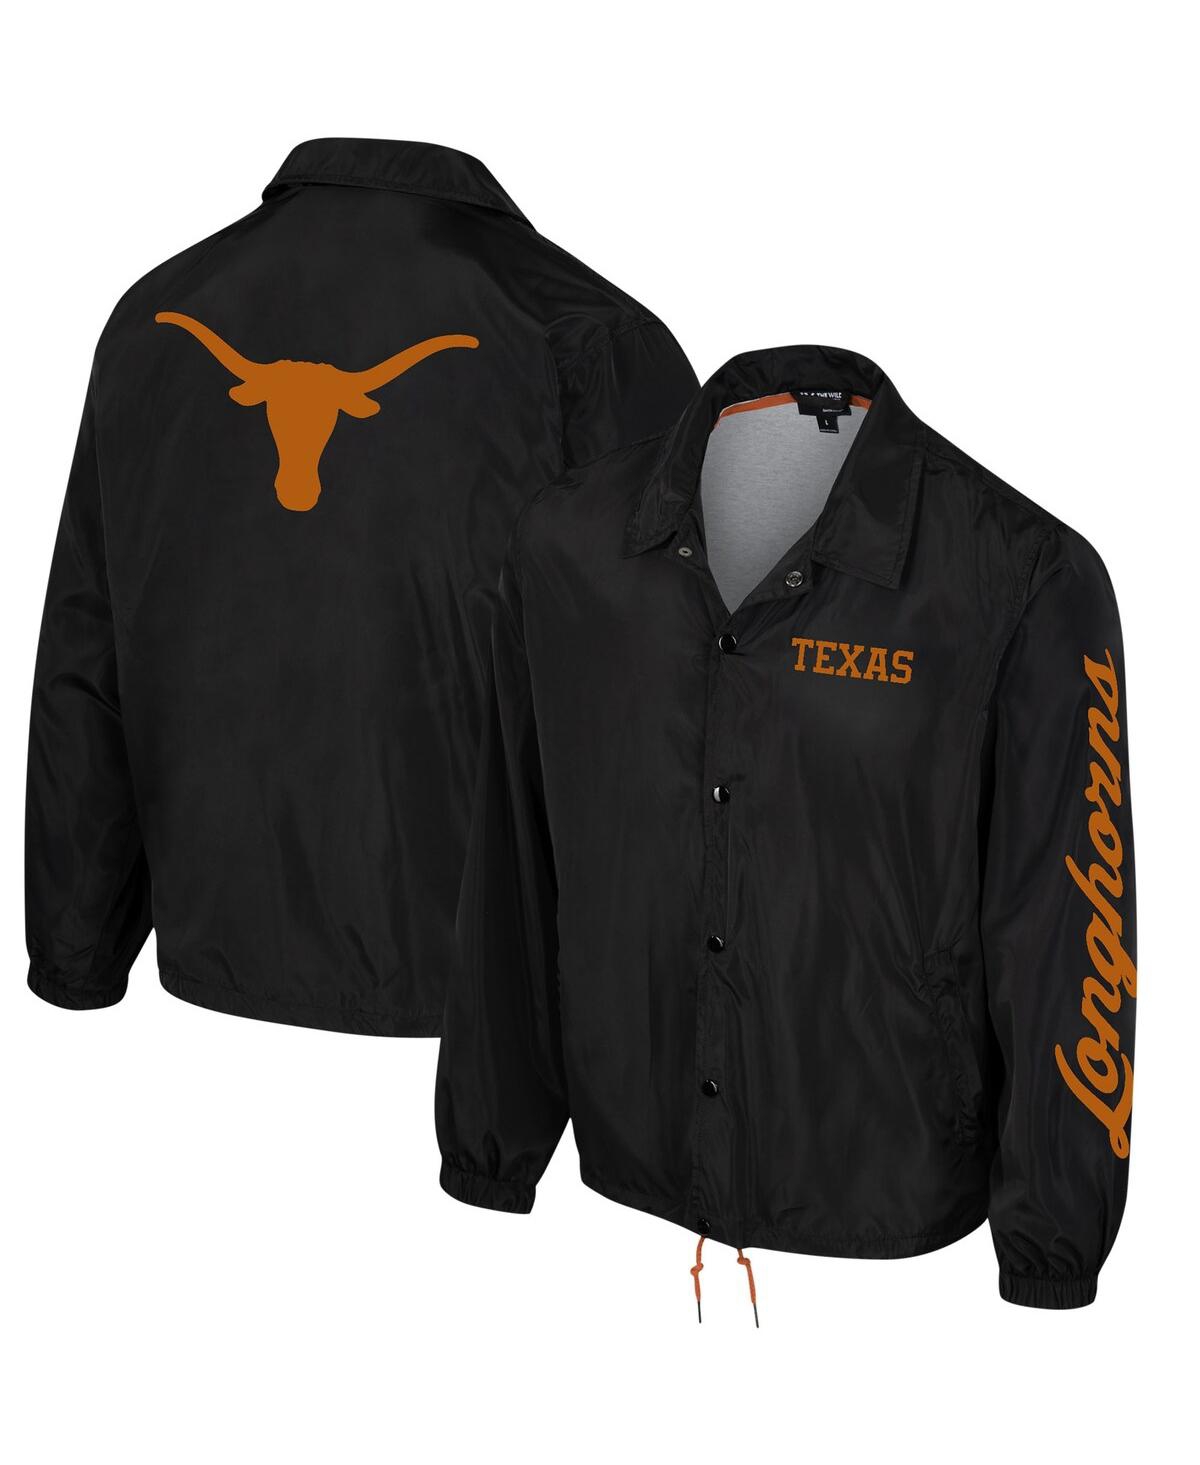 Men's and Women's The Wild Collective Black Texas Longhorns Coaches Full-Snap Jacket - Black